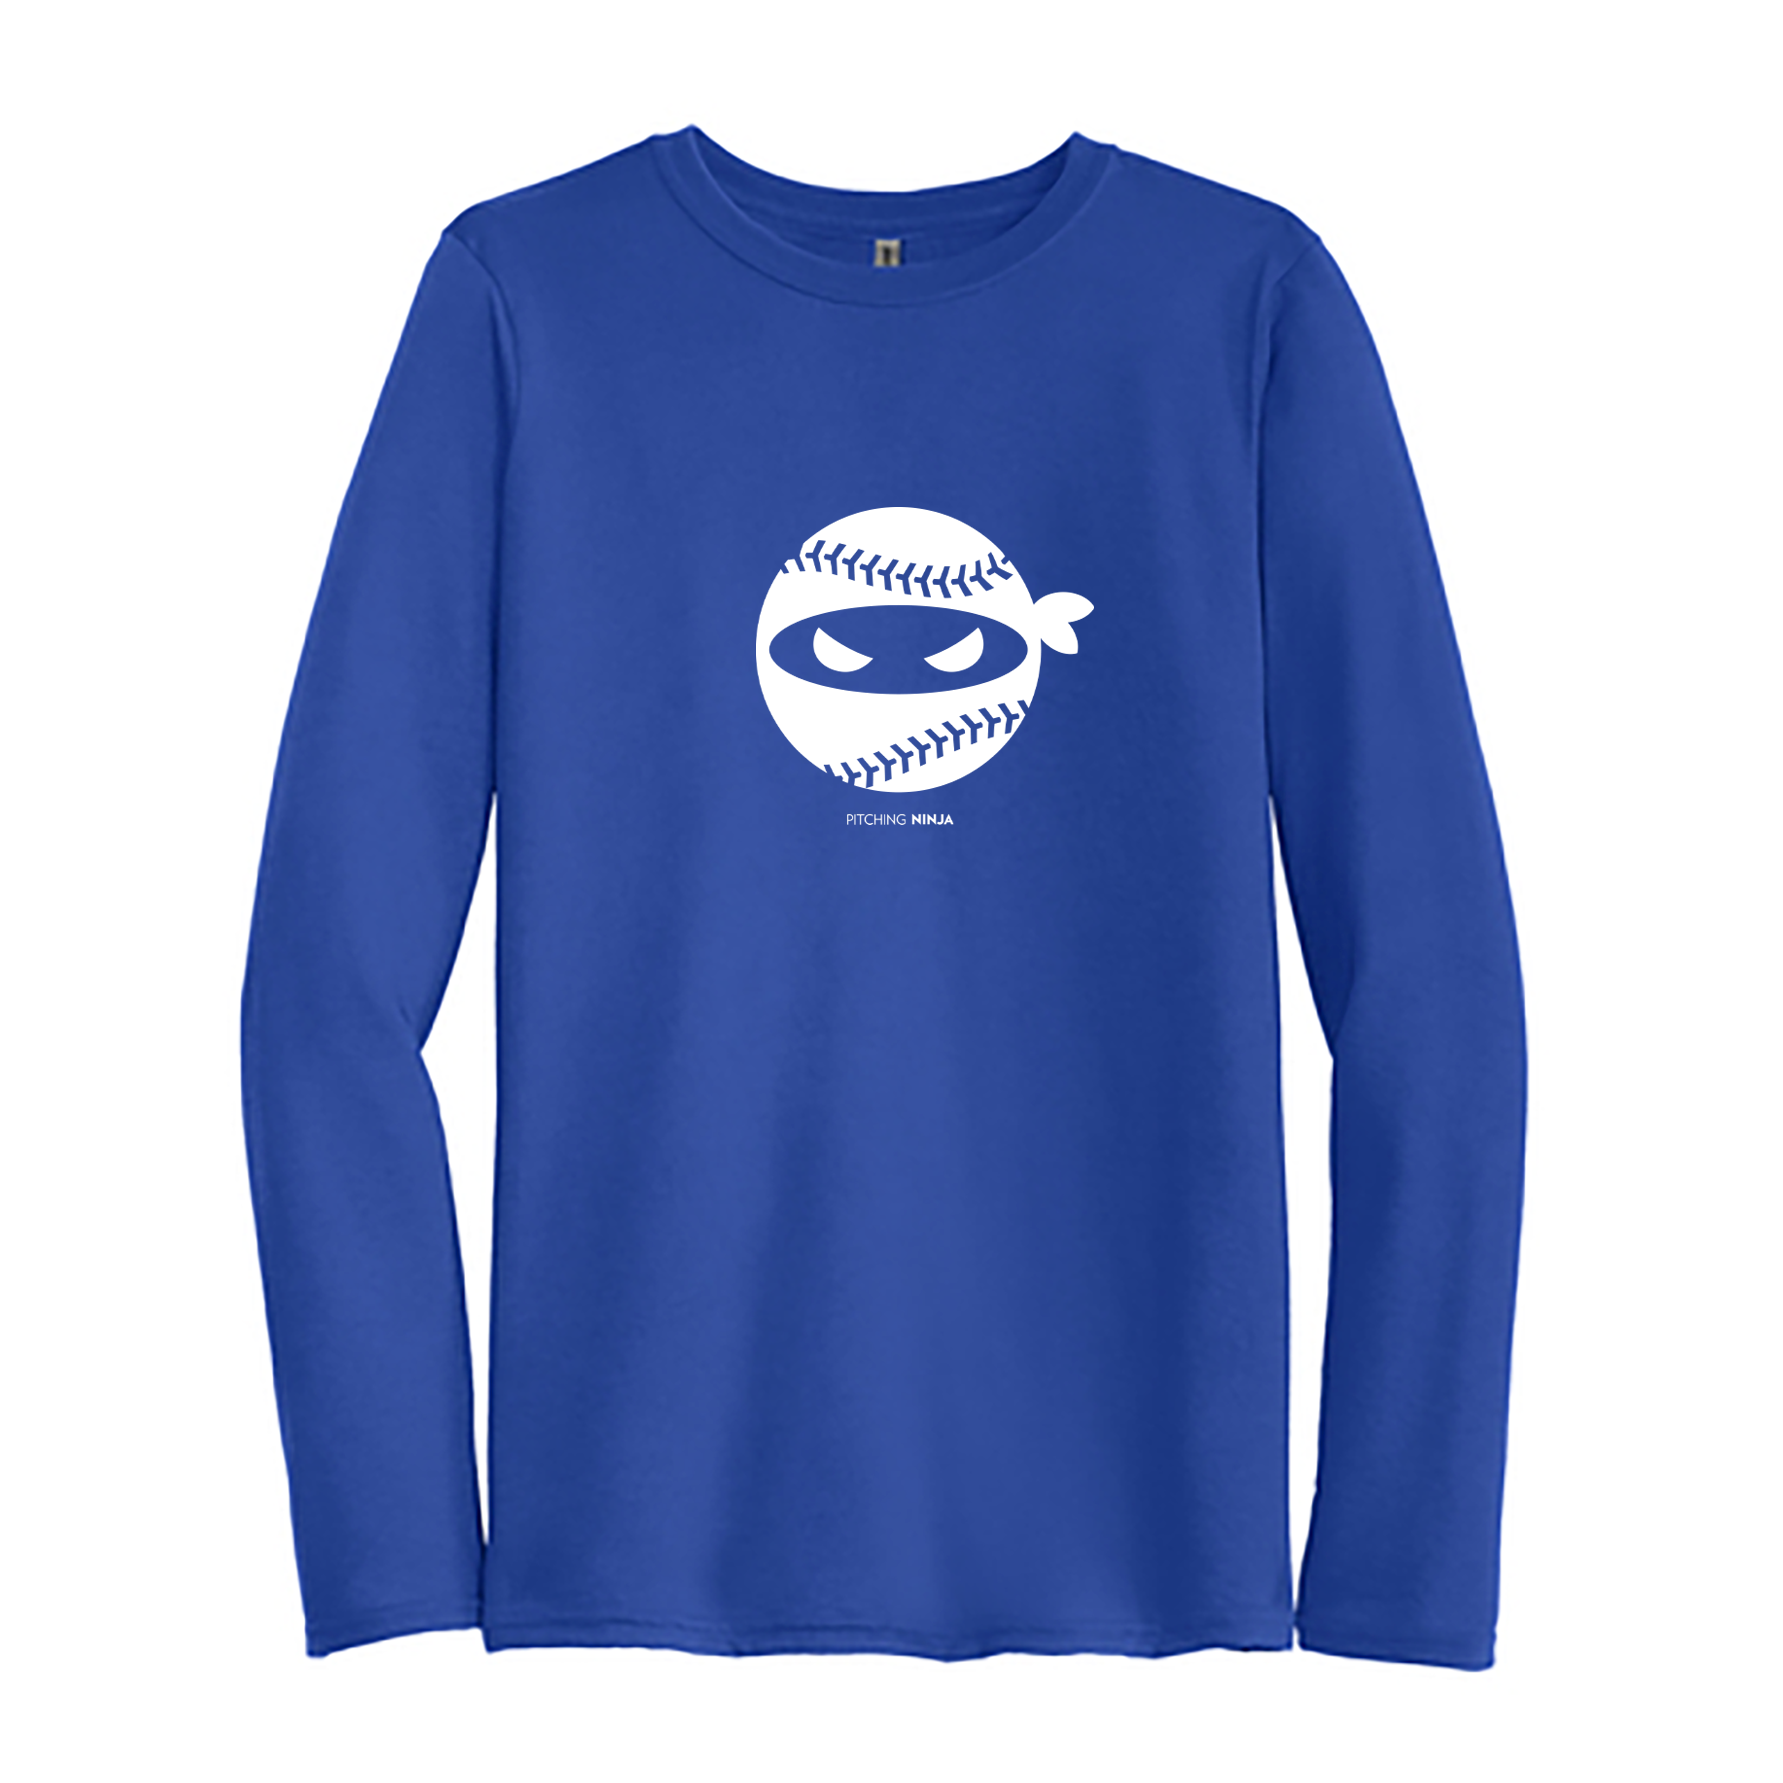 Cool Weather Performance Tee Blue